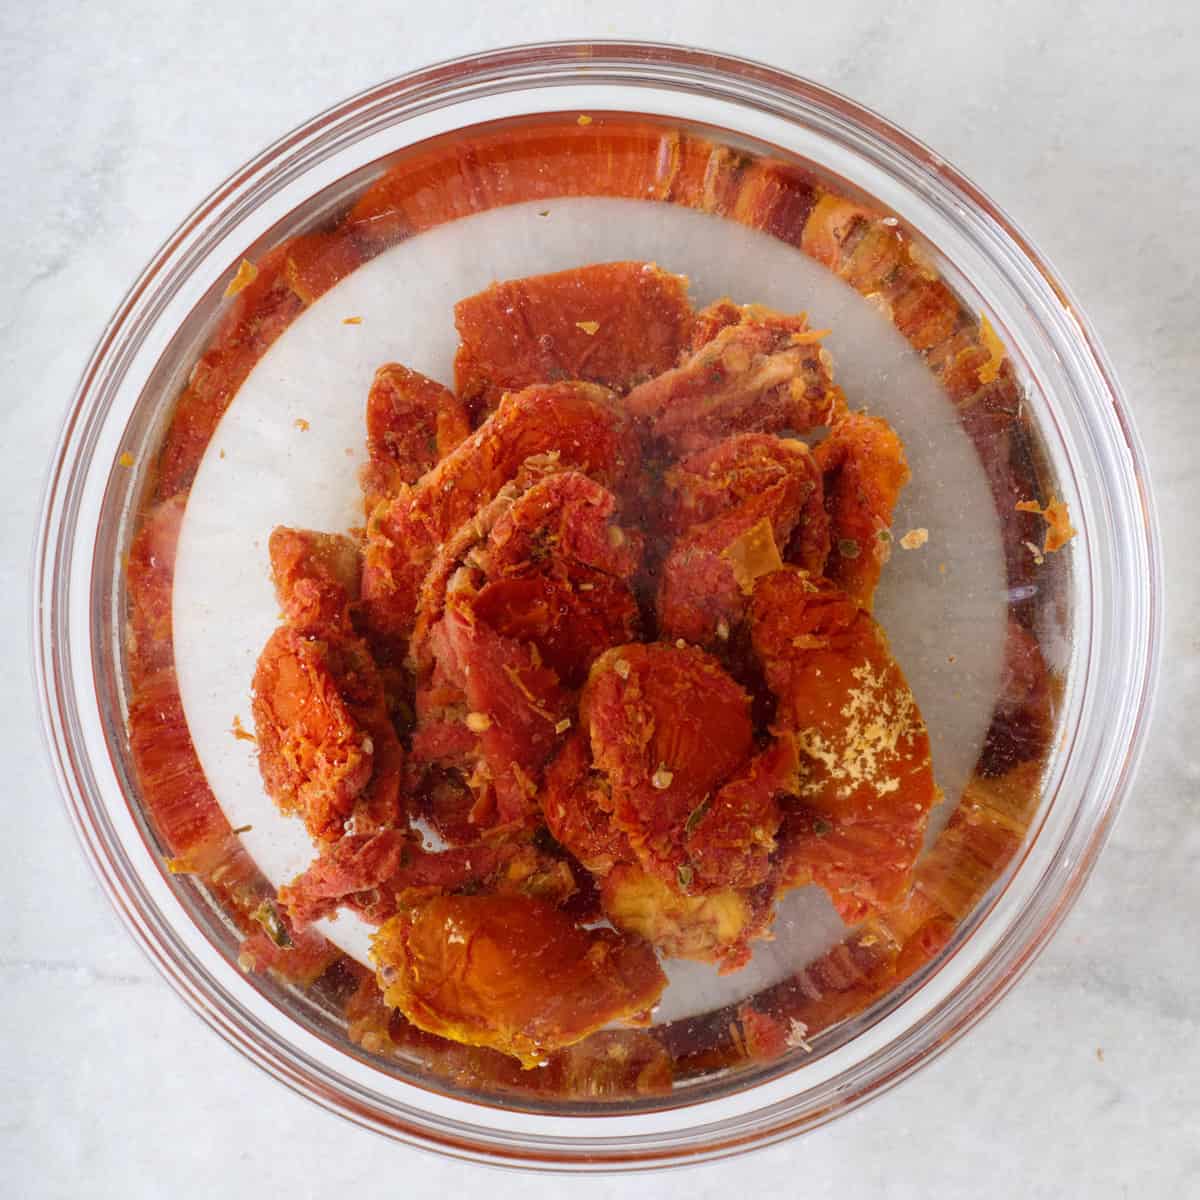 Sundried tomatoes in a bowl of hot water.